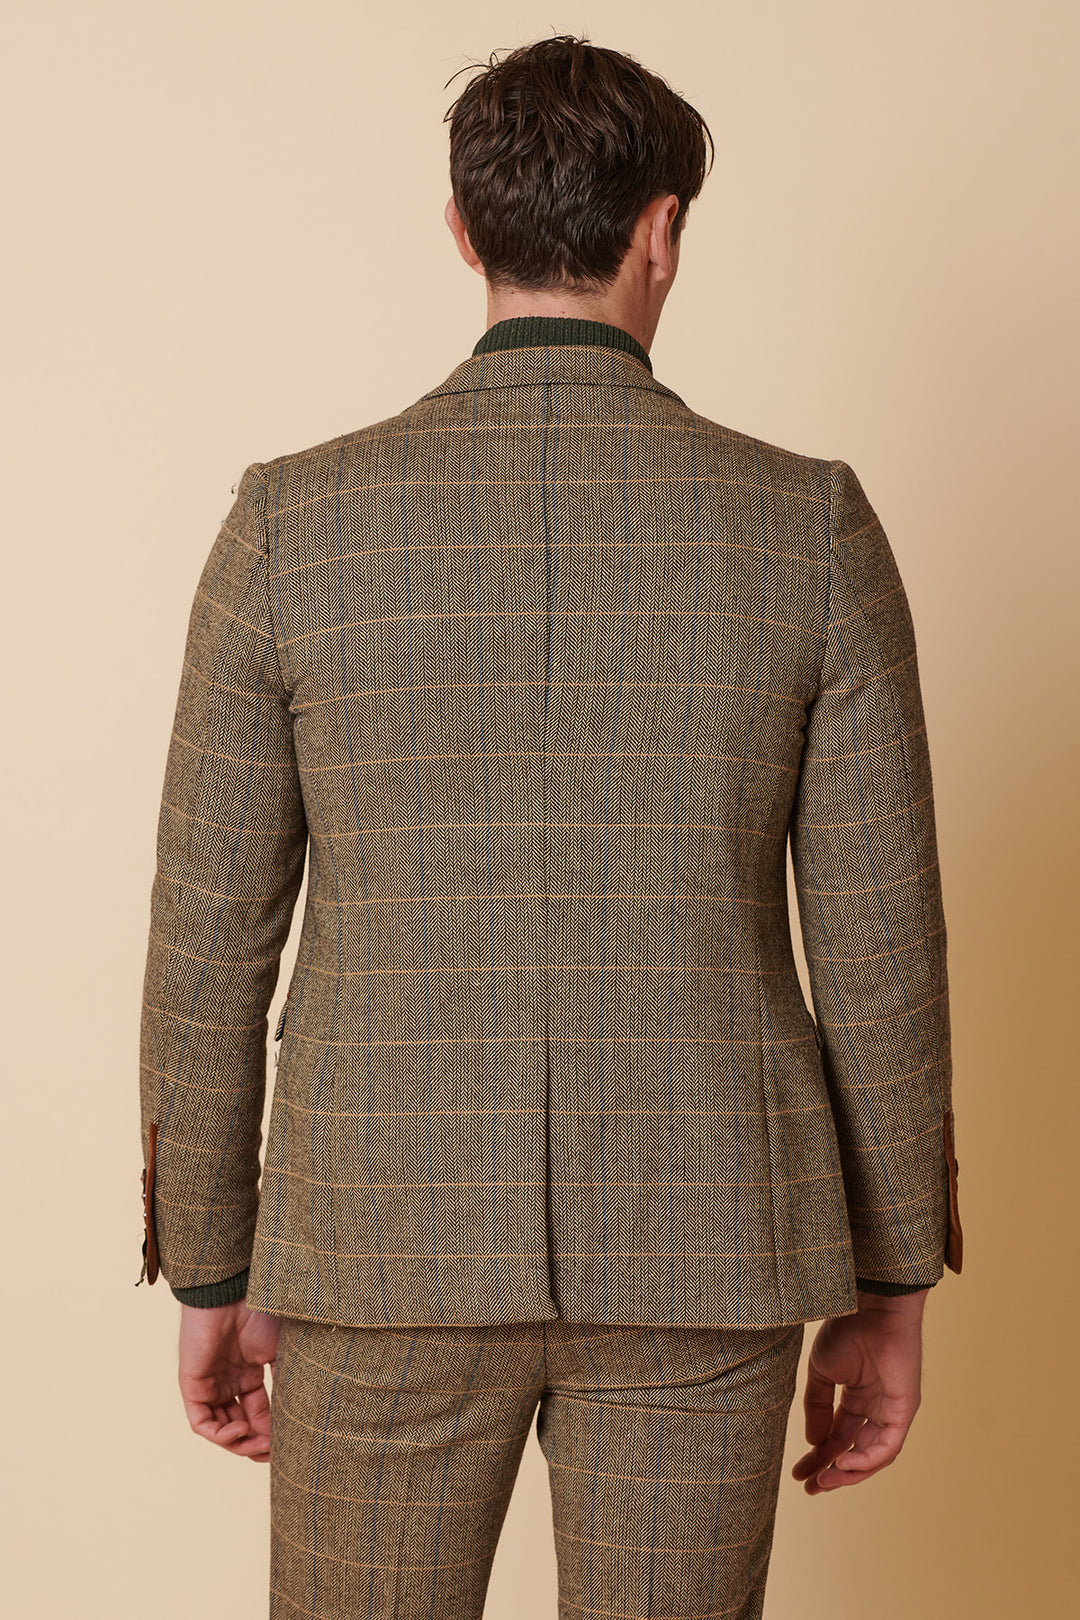 TED - Tan Tweed Check Two Piece Suit